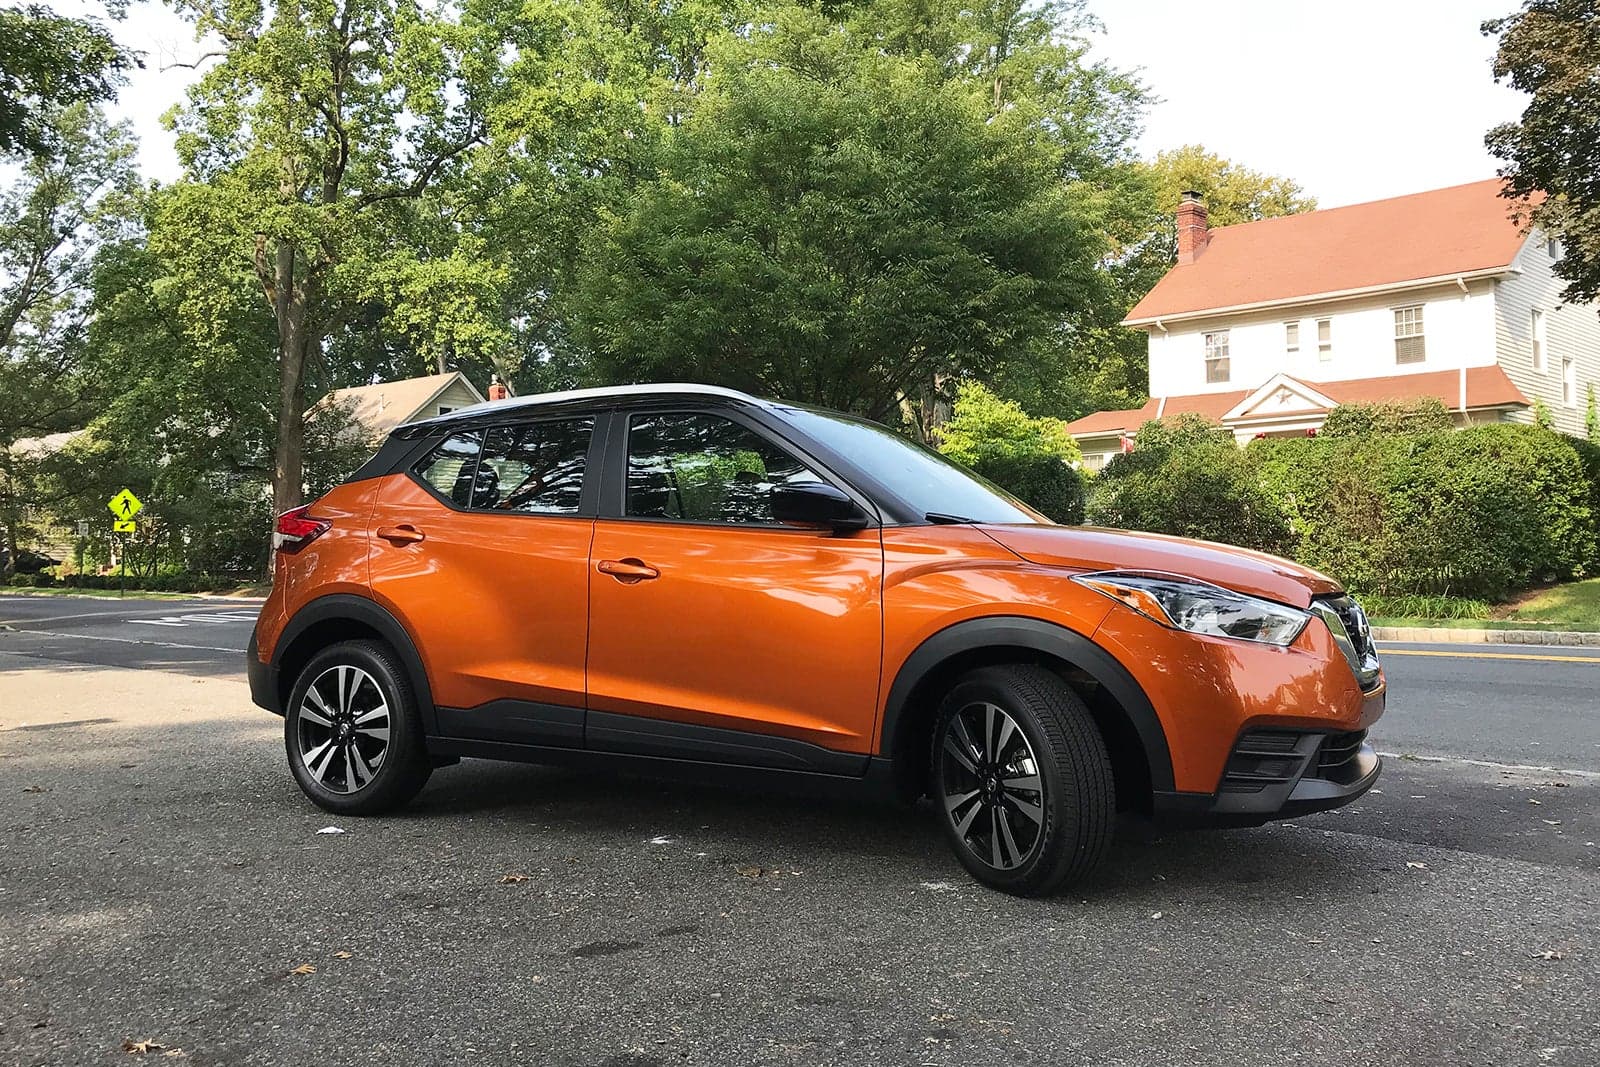 2018 Nissan Kicks SV Review: Value and Features in an Attractive, Compact Crossover Package